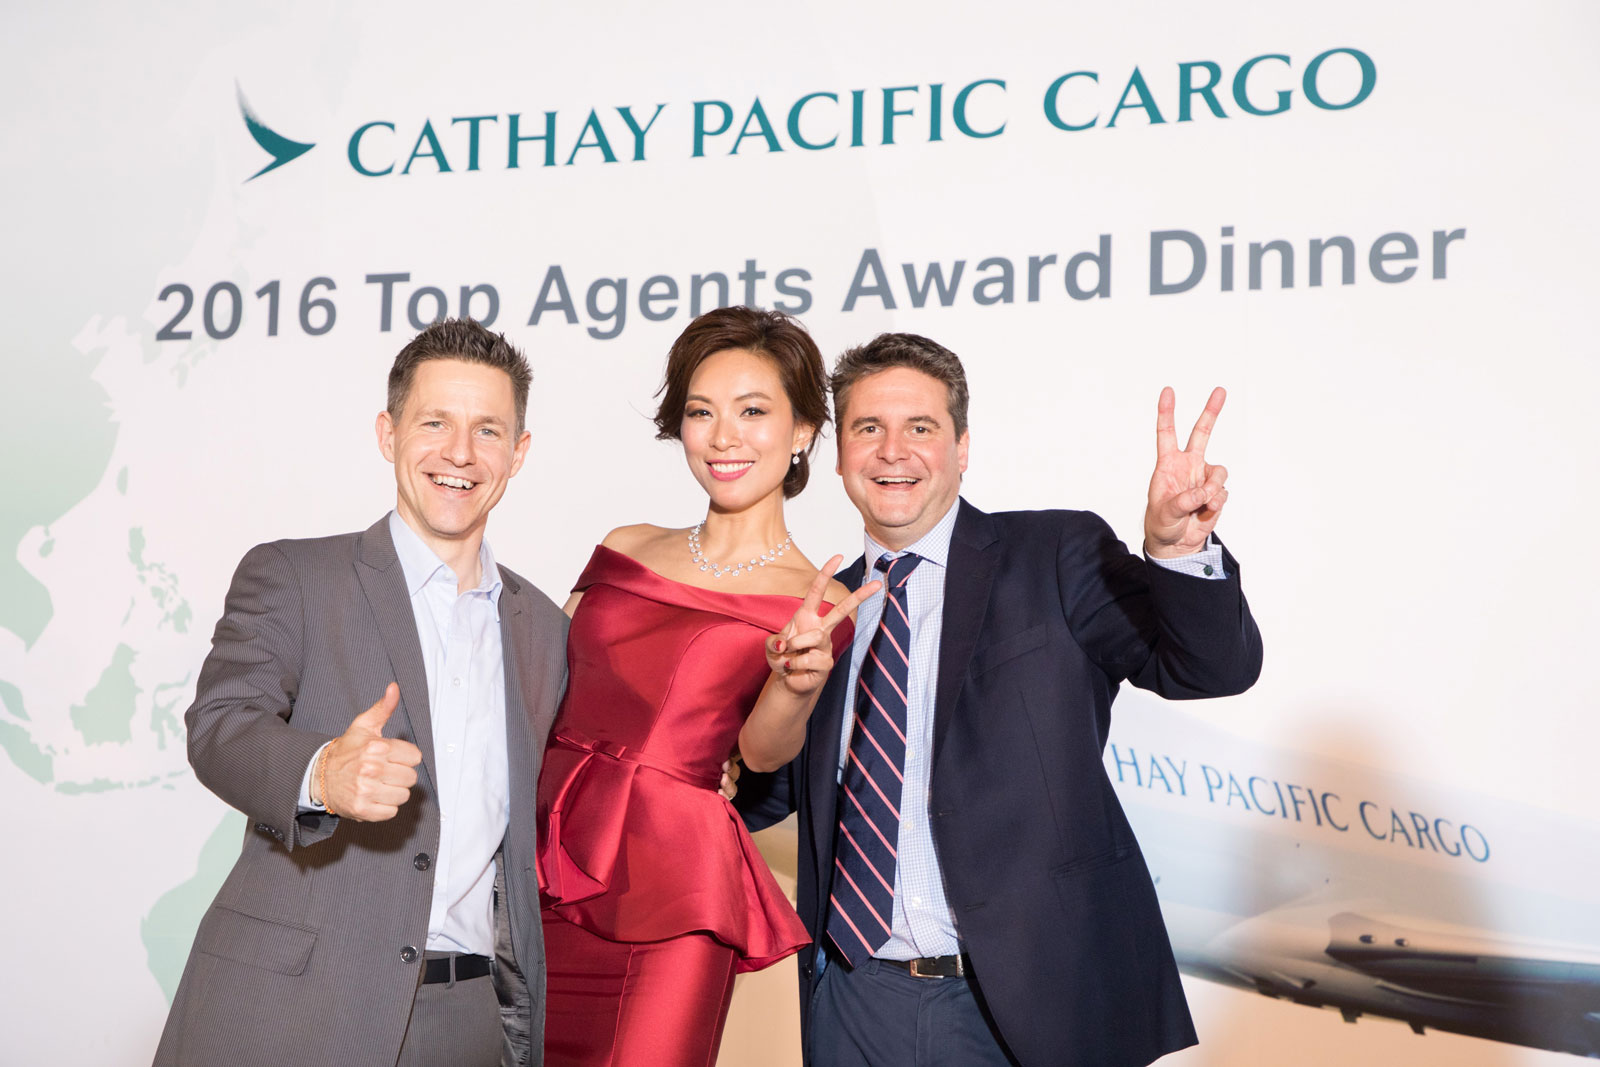 DHL Express' Lars Winkelbauer and Cathay Pacific Cargo's Mark Sutch meet Queenie Chu